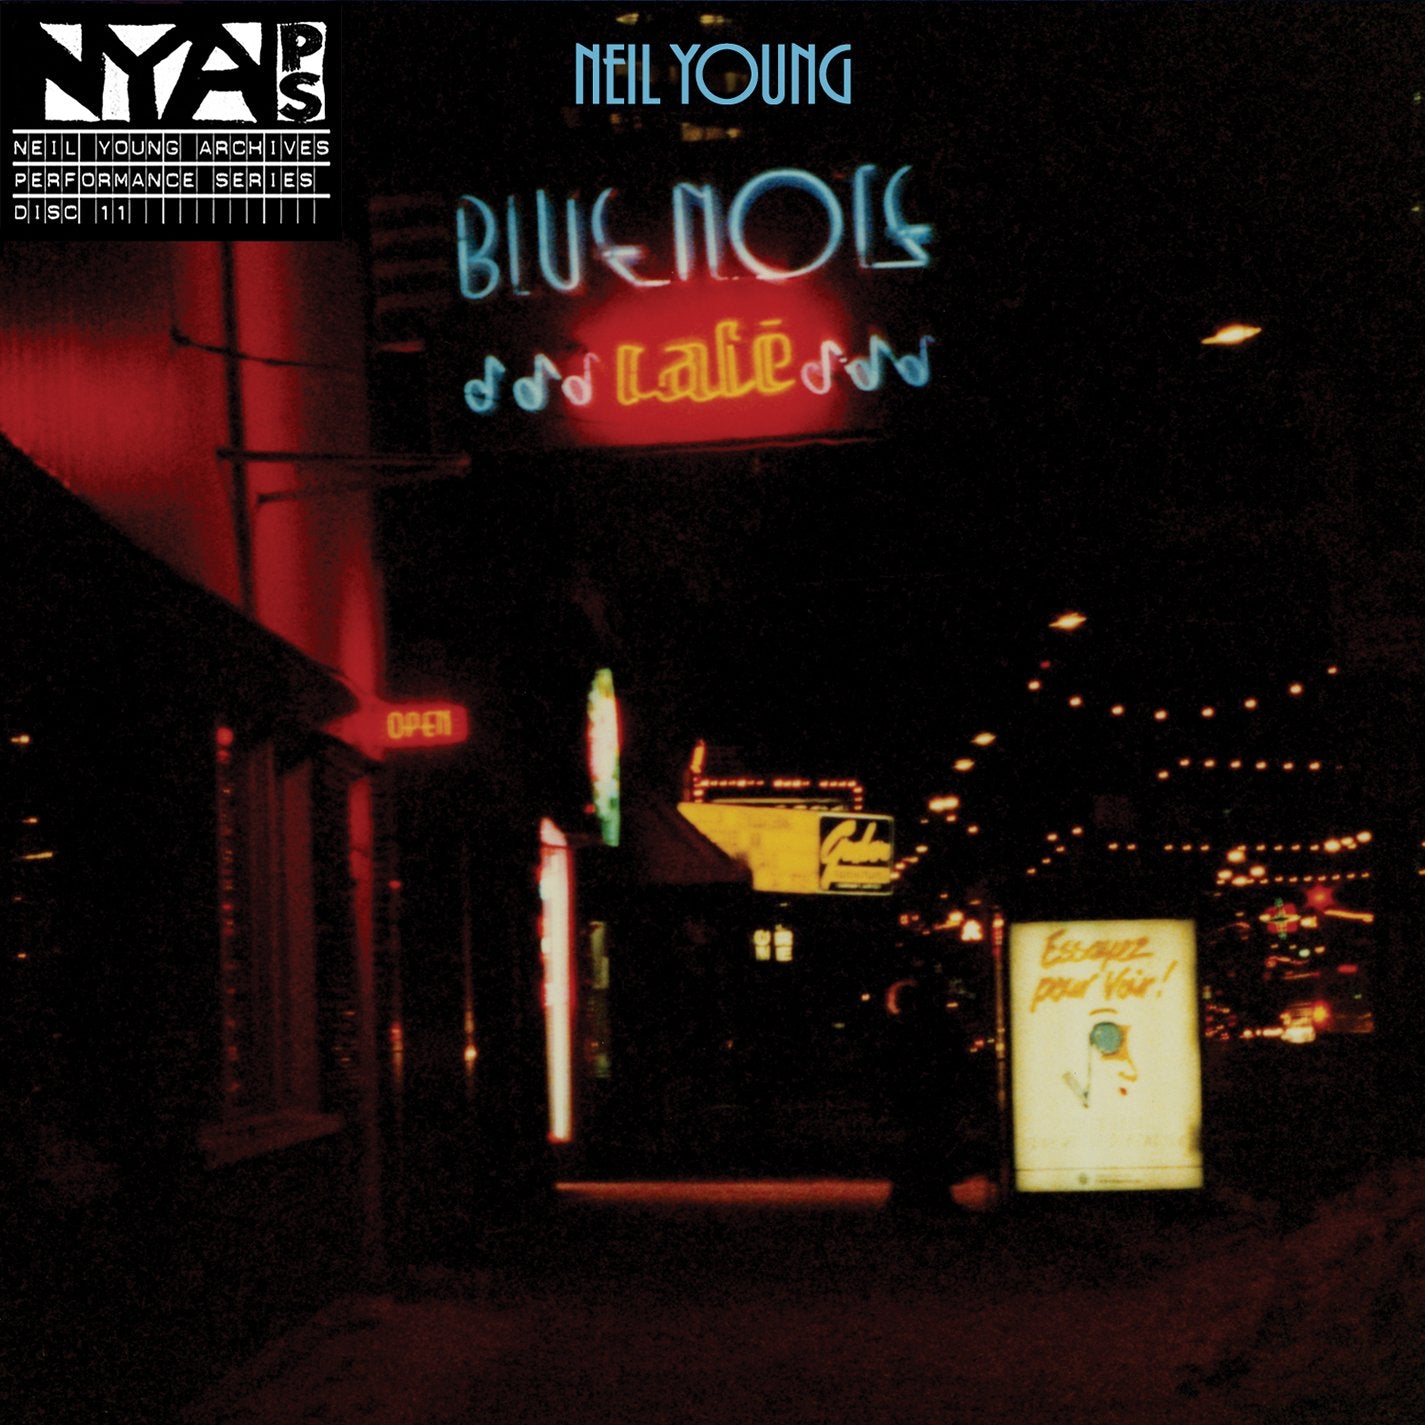 Neil Young - Bluenote Cafe  - 2CD